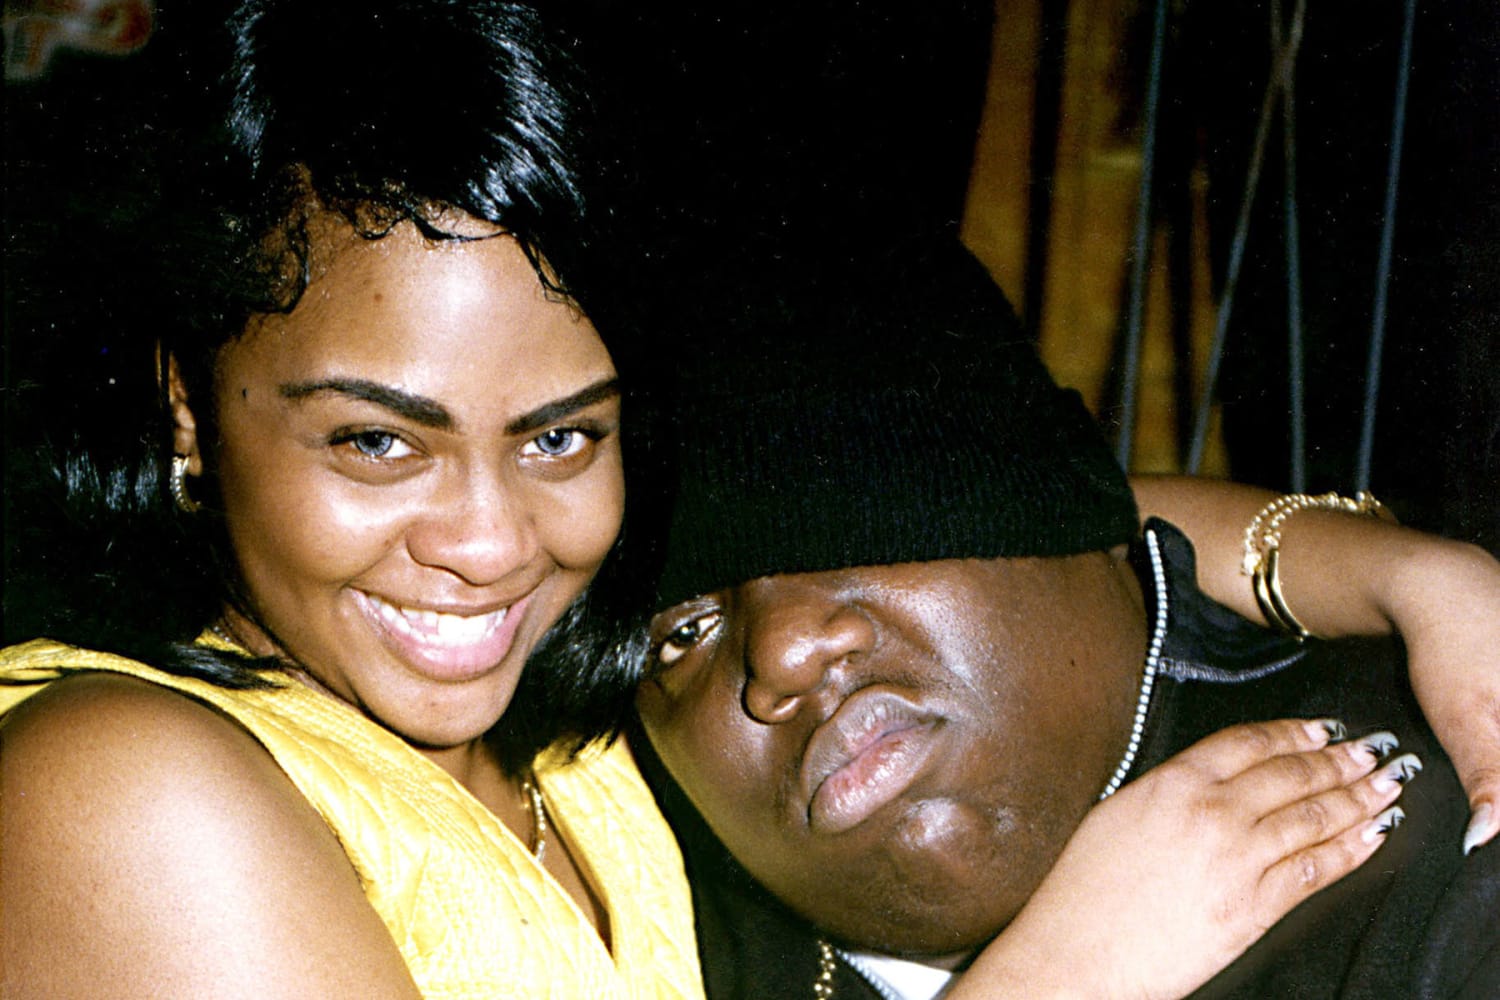 Flashback: The Notorious B.I.G. Rhymes as Lil' Kim in 'Queen Bitch' Demo